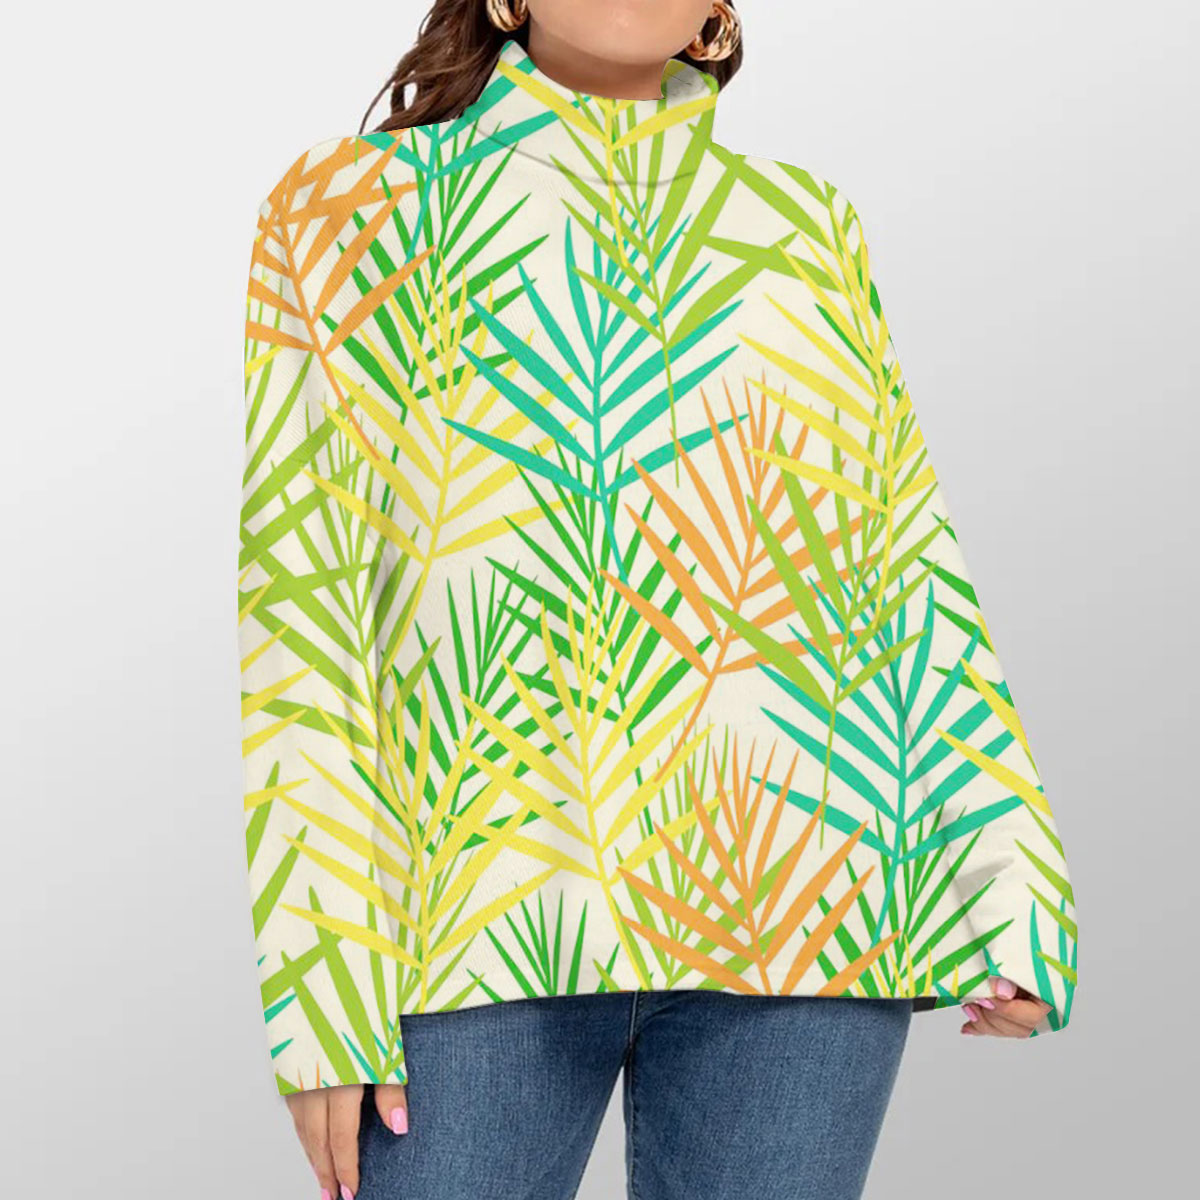 Colorful Withered Palm Fronds Turtleneck Sweater